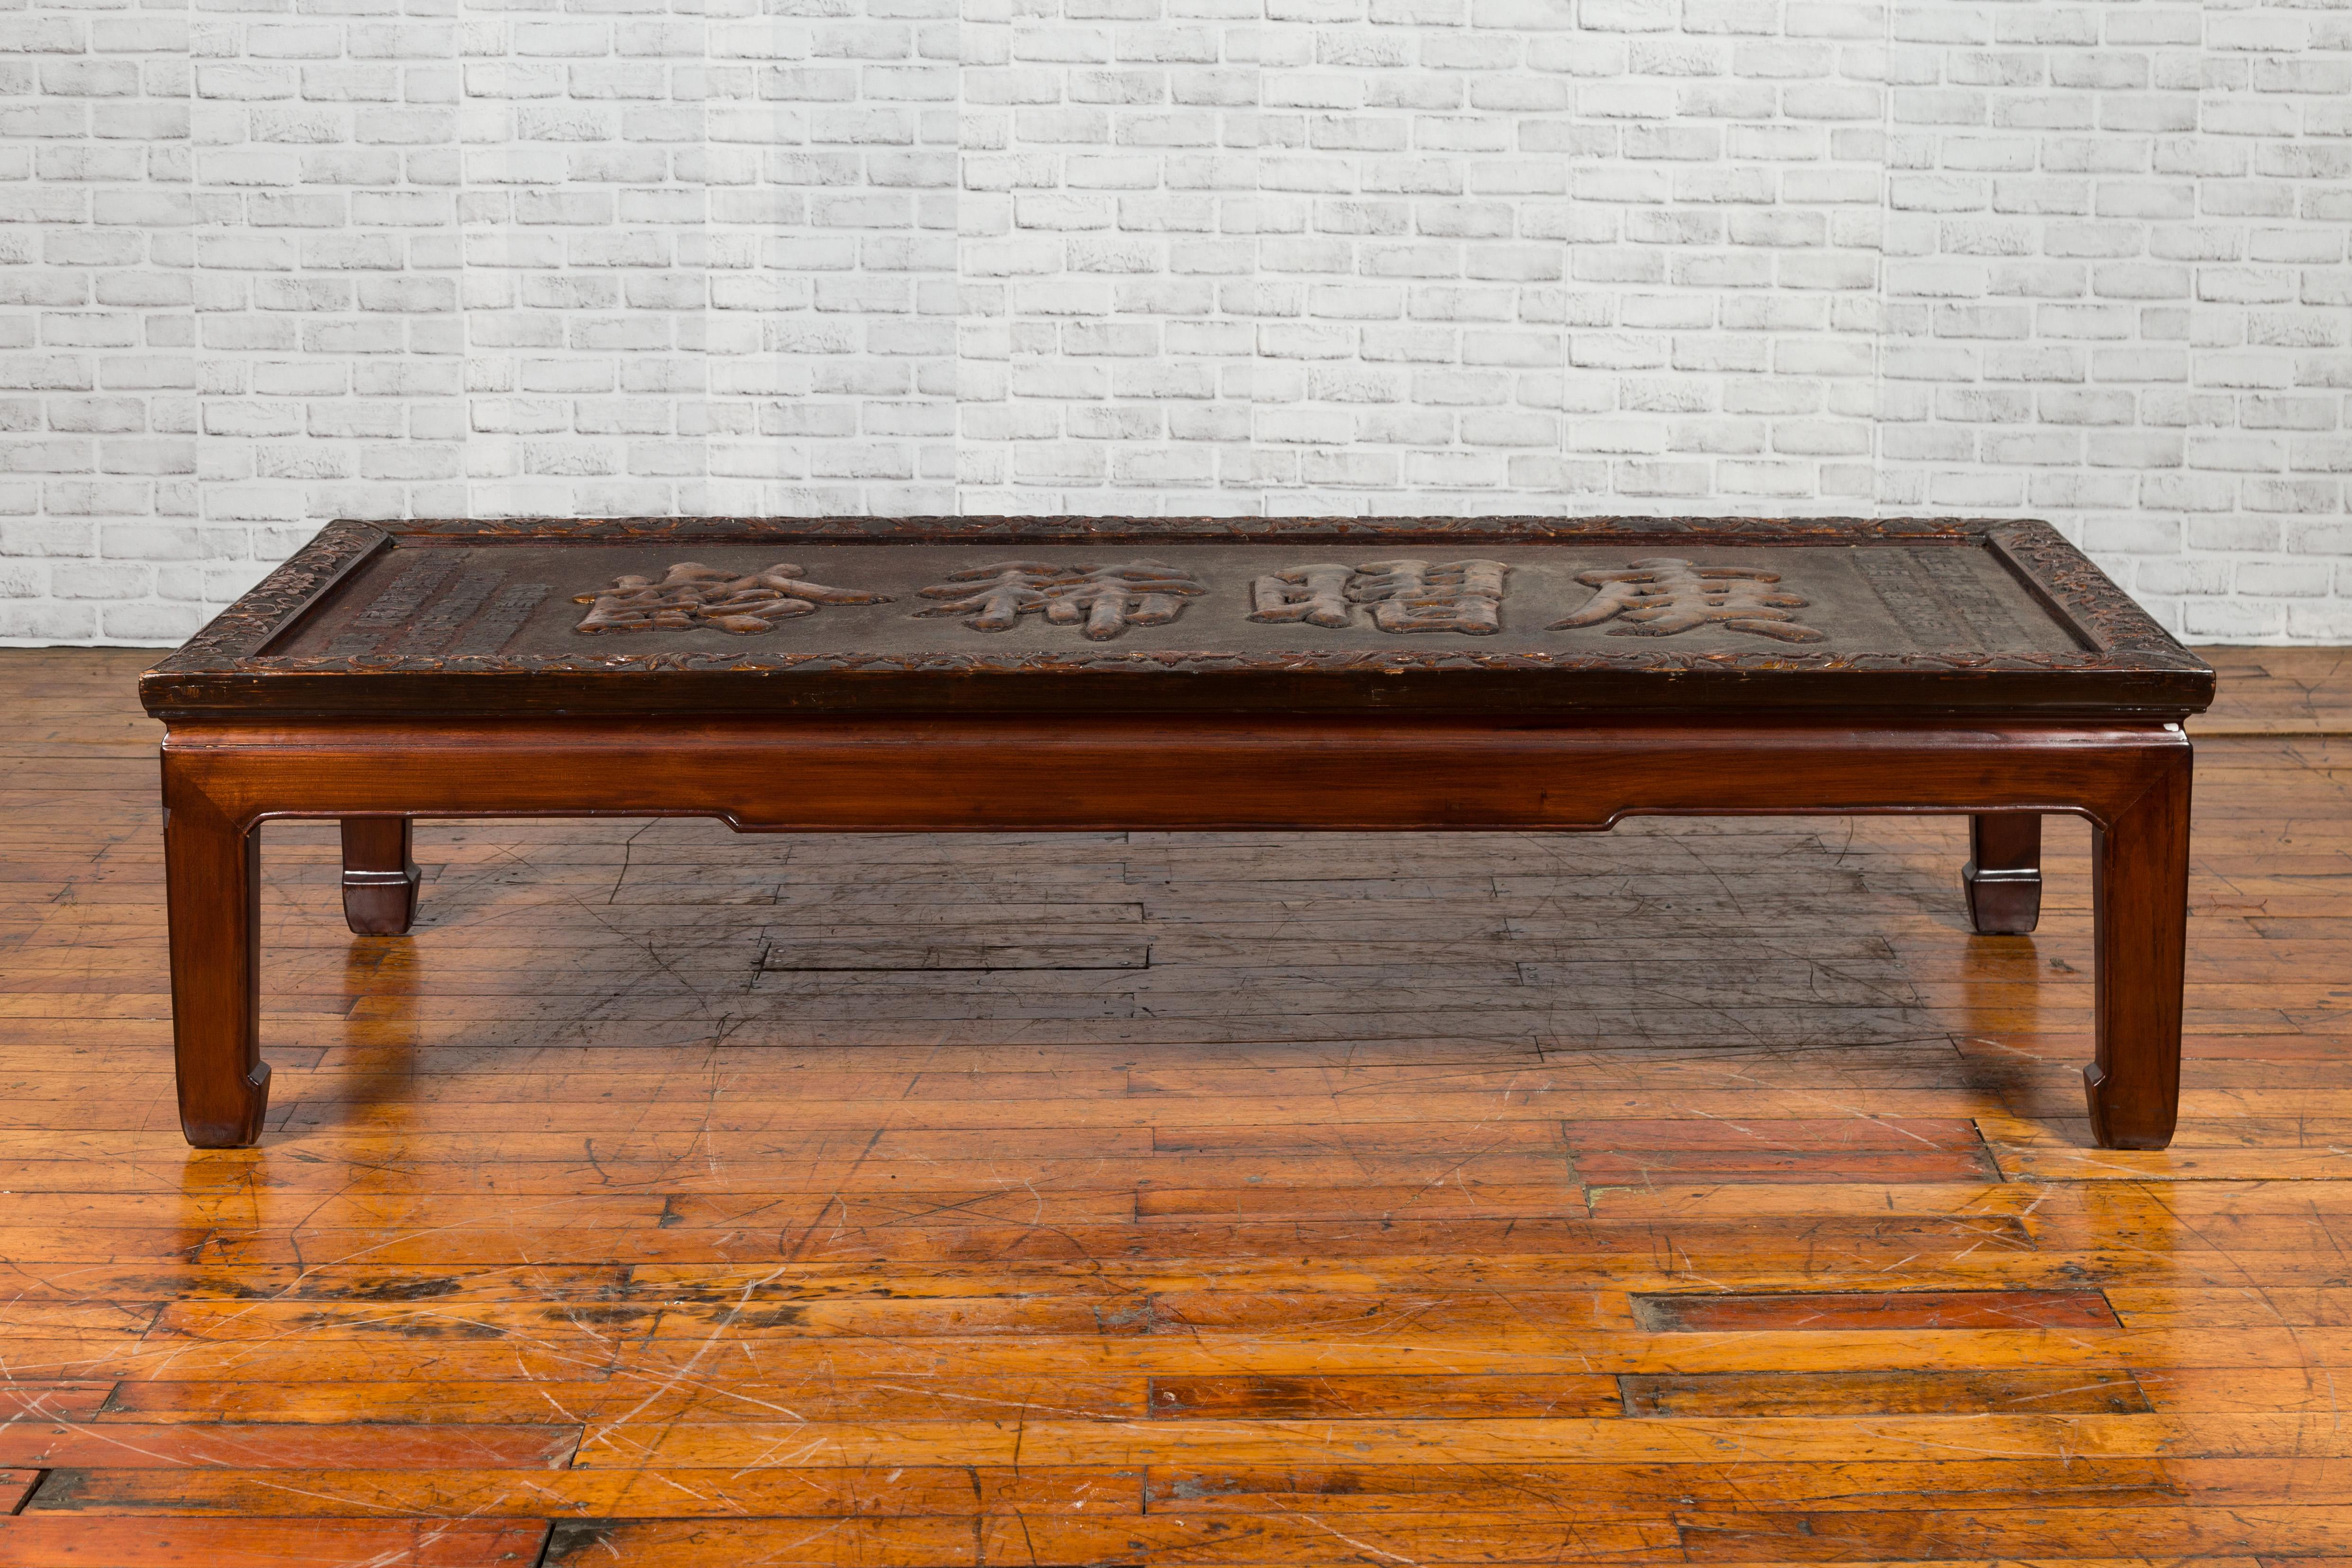 A Chinese Qing dynasty shop sign from the 19th century with gilded calligraphy, made into a coffee table. Created in China during the Qing dynasty, this rectangular shop sign, adorned with four large raised gilded calligraphy characters flanked with